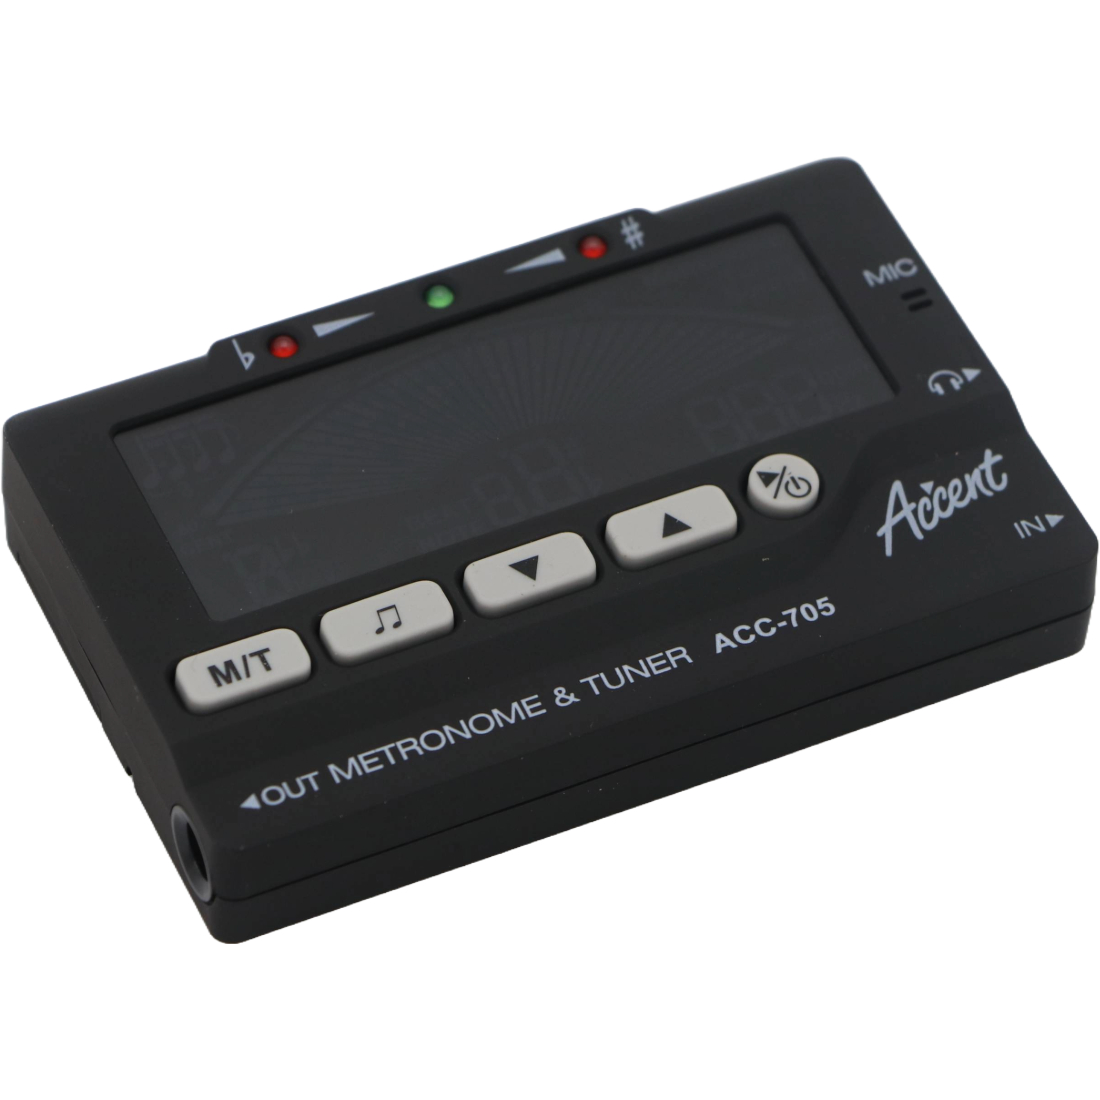 Black Accent combination metronome and tuner